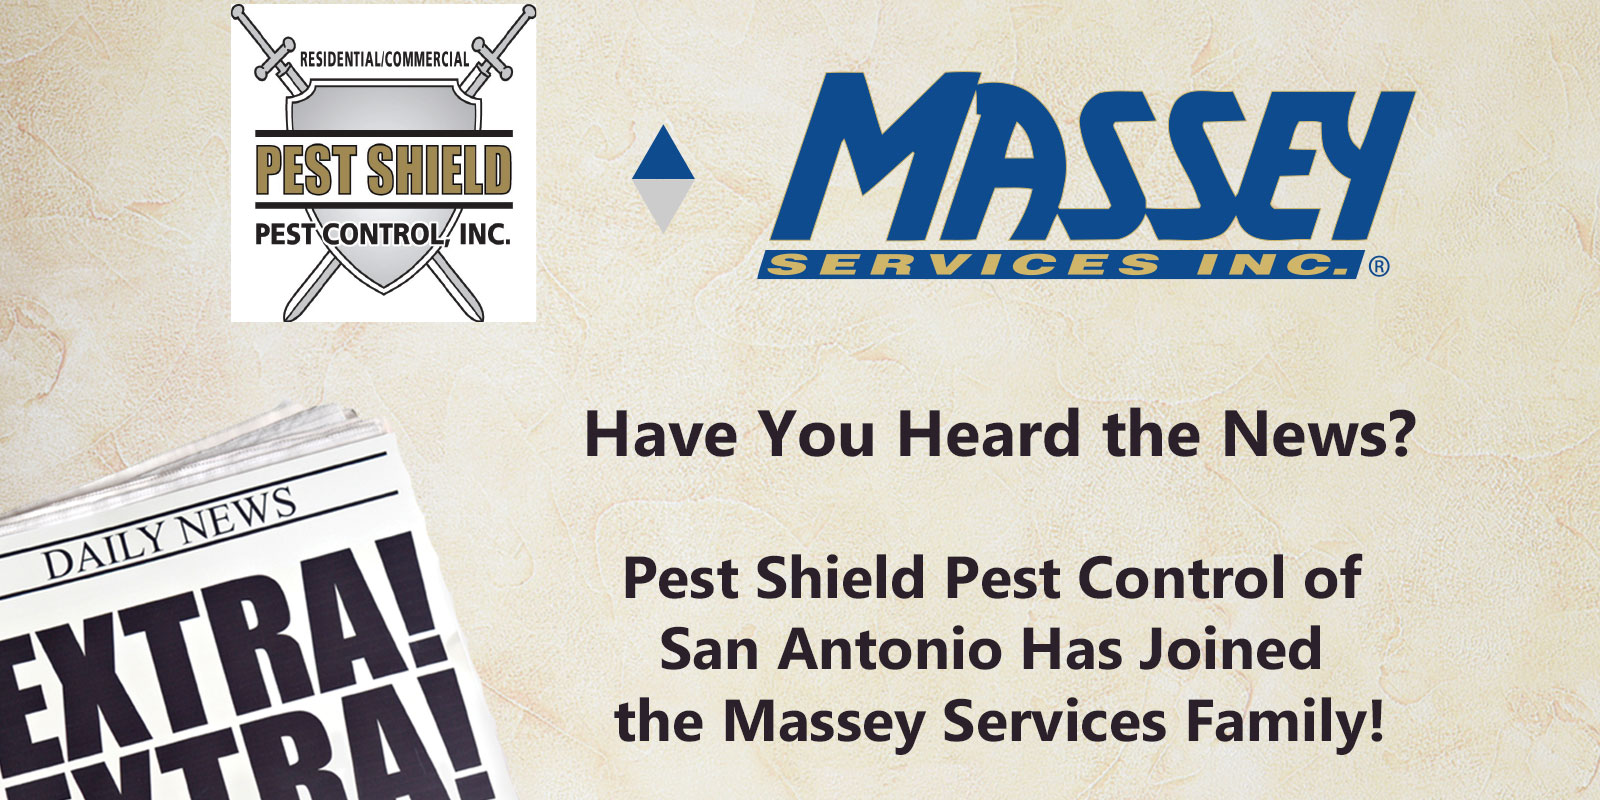 Welcome Pest Shield to the Massey Family